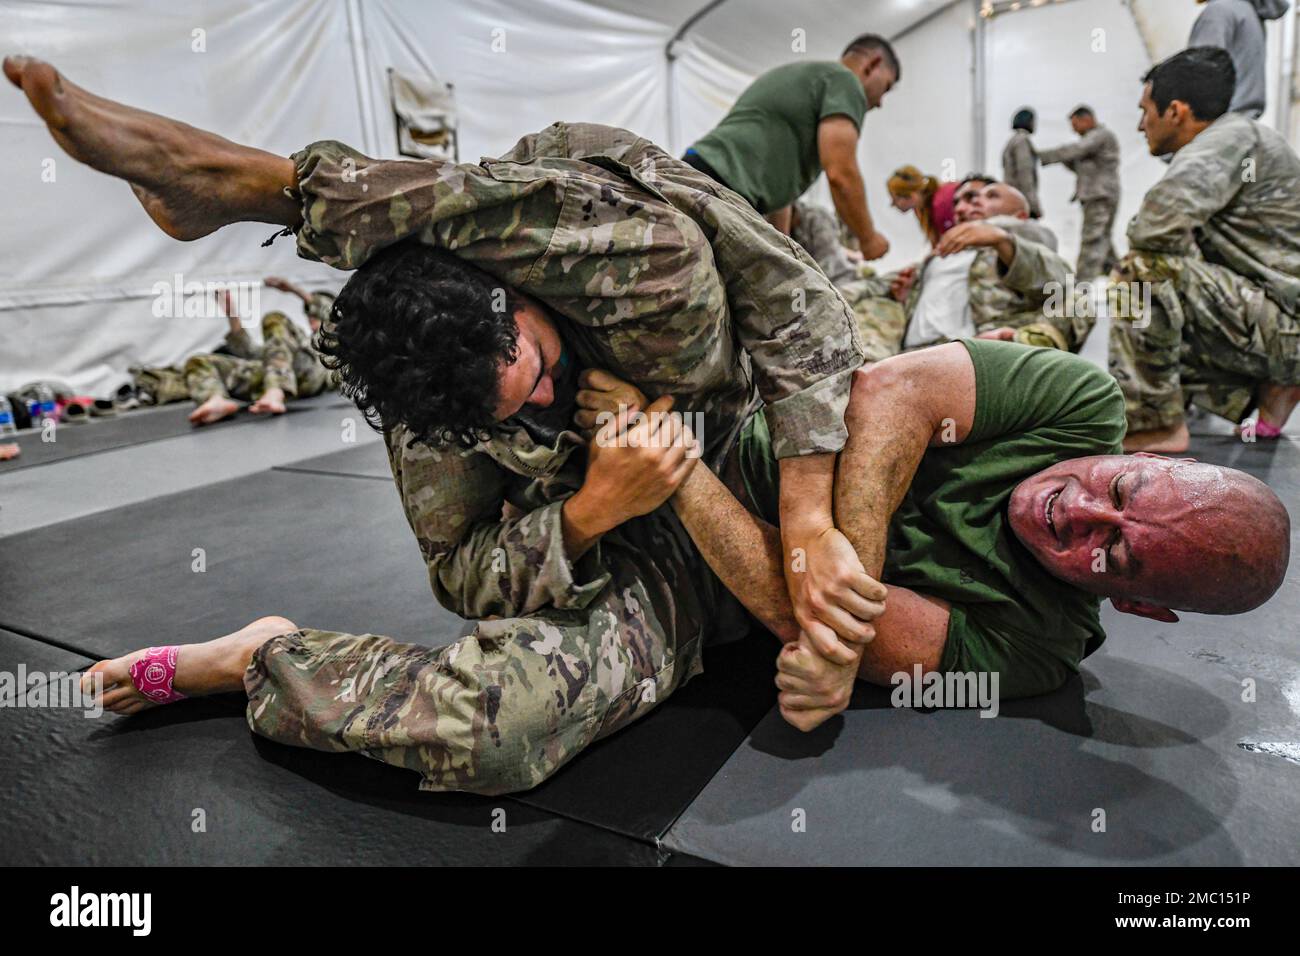 Two U.S. Soldiers, assigned to Task Force Hurricane, fight to take each other down as a one-week combative level 1 qualification course at Prince Sultan Air Base, Kingdom of Saudi Arabia, is instructed in the background, June 23, 2022. The 40 hr. course allows graduates to teach others the 14 basic combative moves and two takedowns covered in level 1, only level 2 combative graduates or higher can qualify students. Two U.S. Air Force Defenders assigned to the 378th Expeditionary Security Forces Squadron participated in the course. Stock Photo